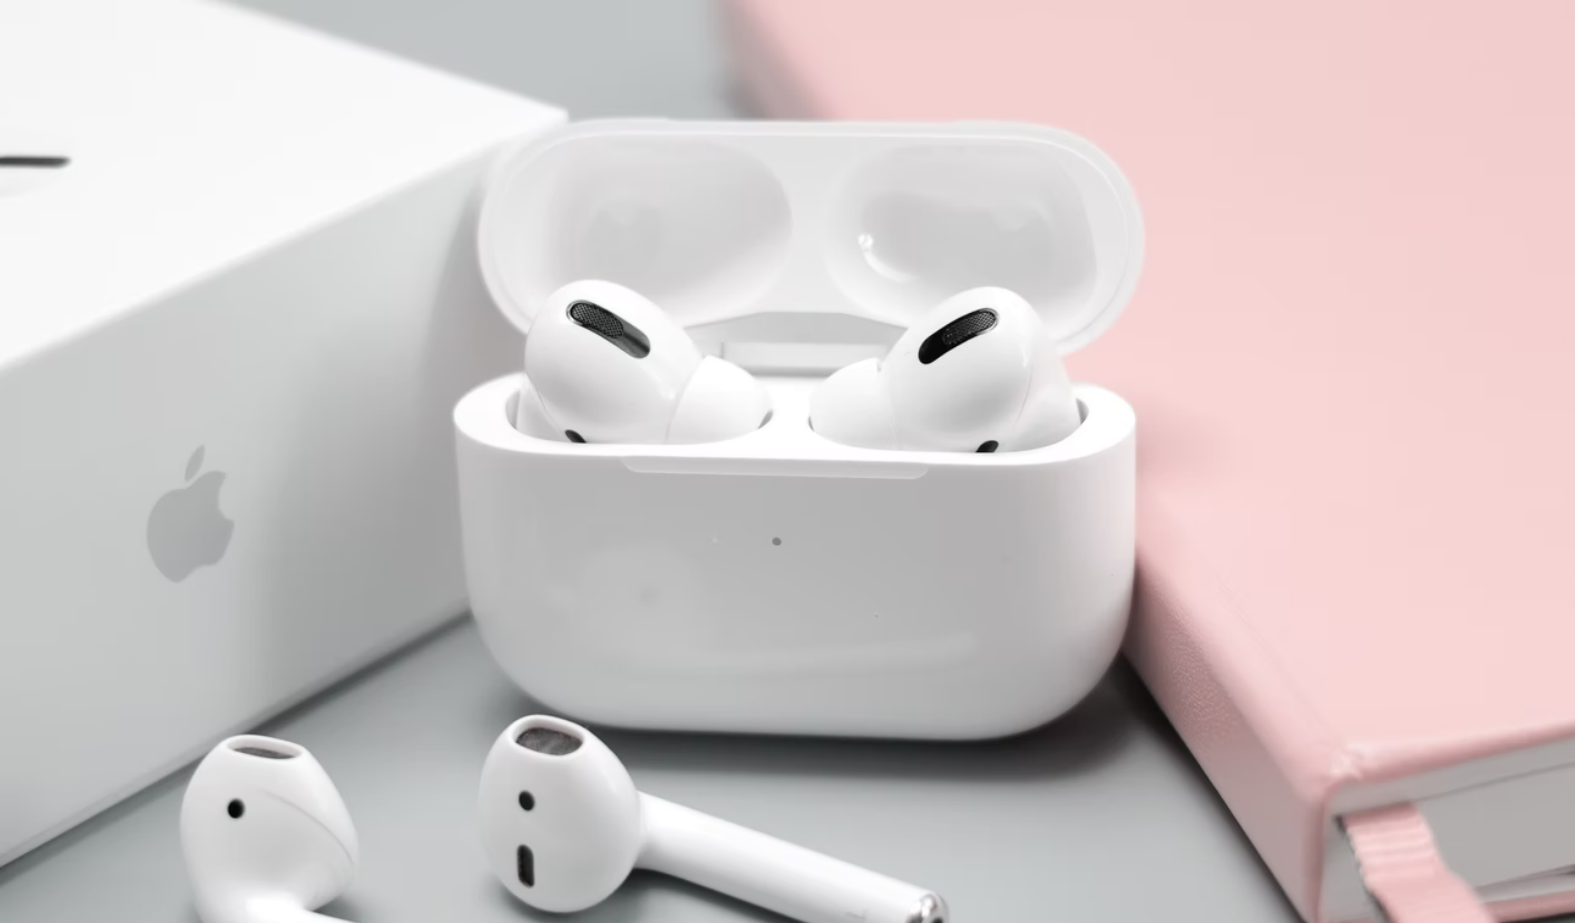 What does it mean when AirPods are flashing red